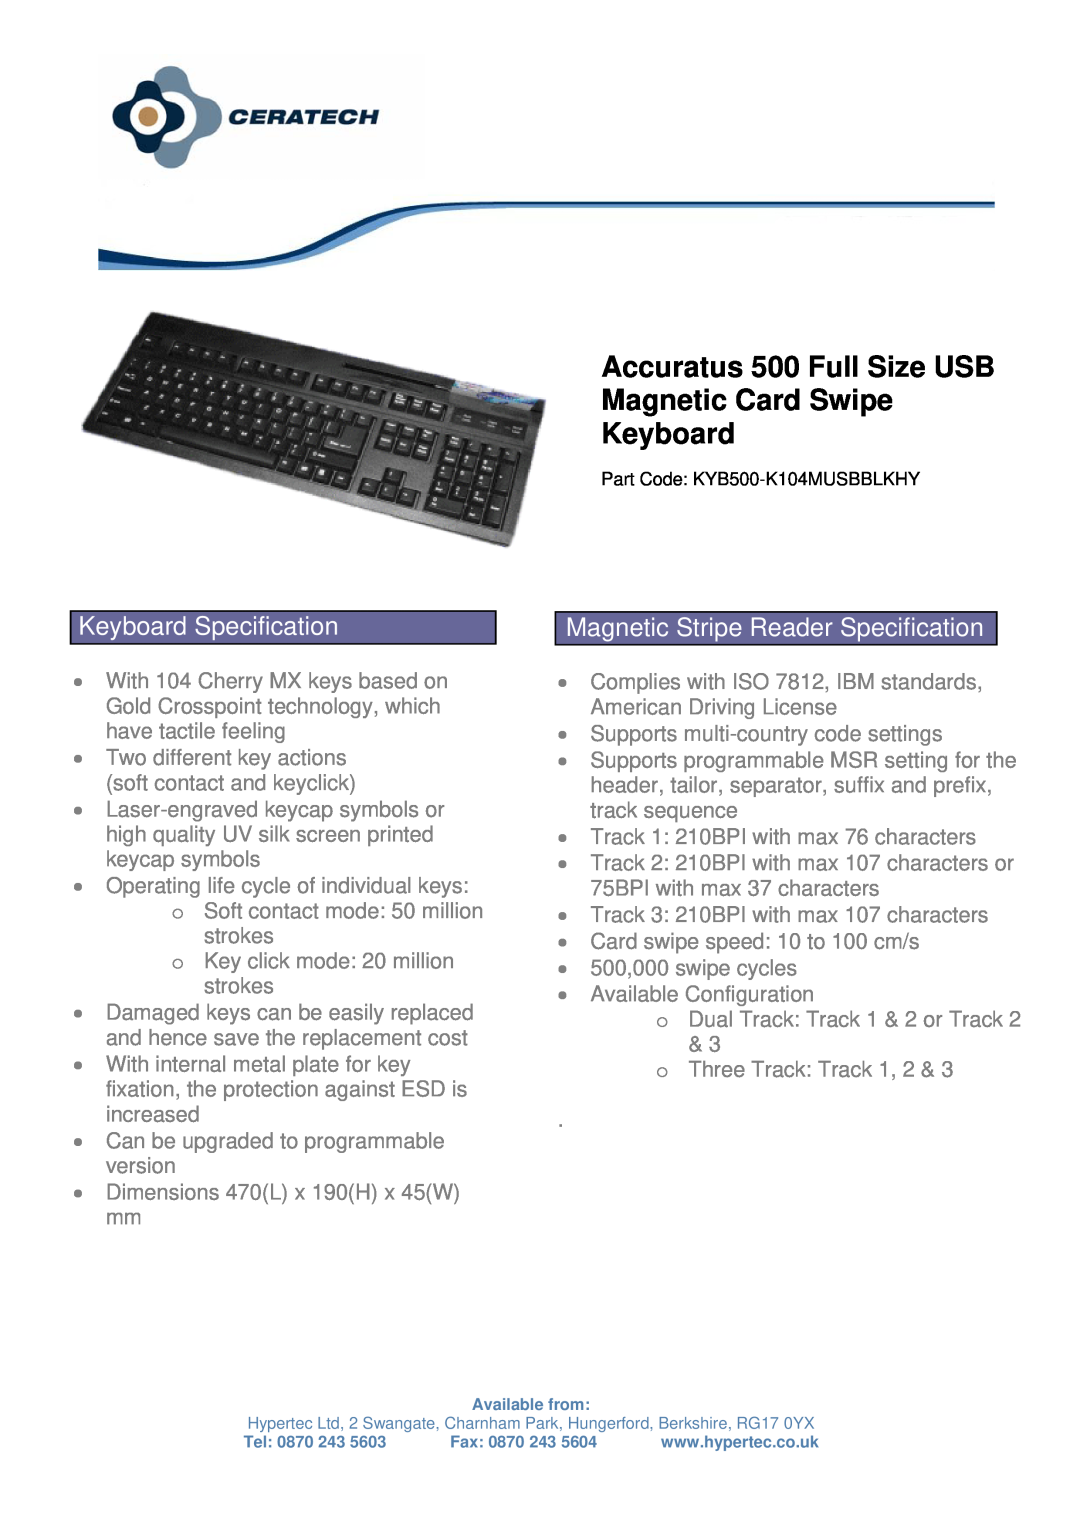 Hypertec KYB500-K104MUSBBLKHY dimensions Accuratus 500 Full Size USB Magnetic Card Swipe Keyboard, Keyboard Specification 